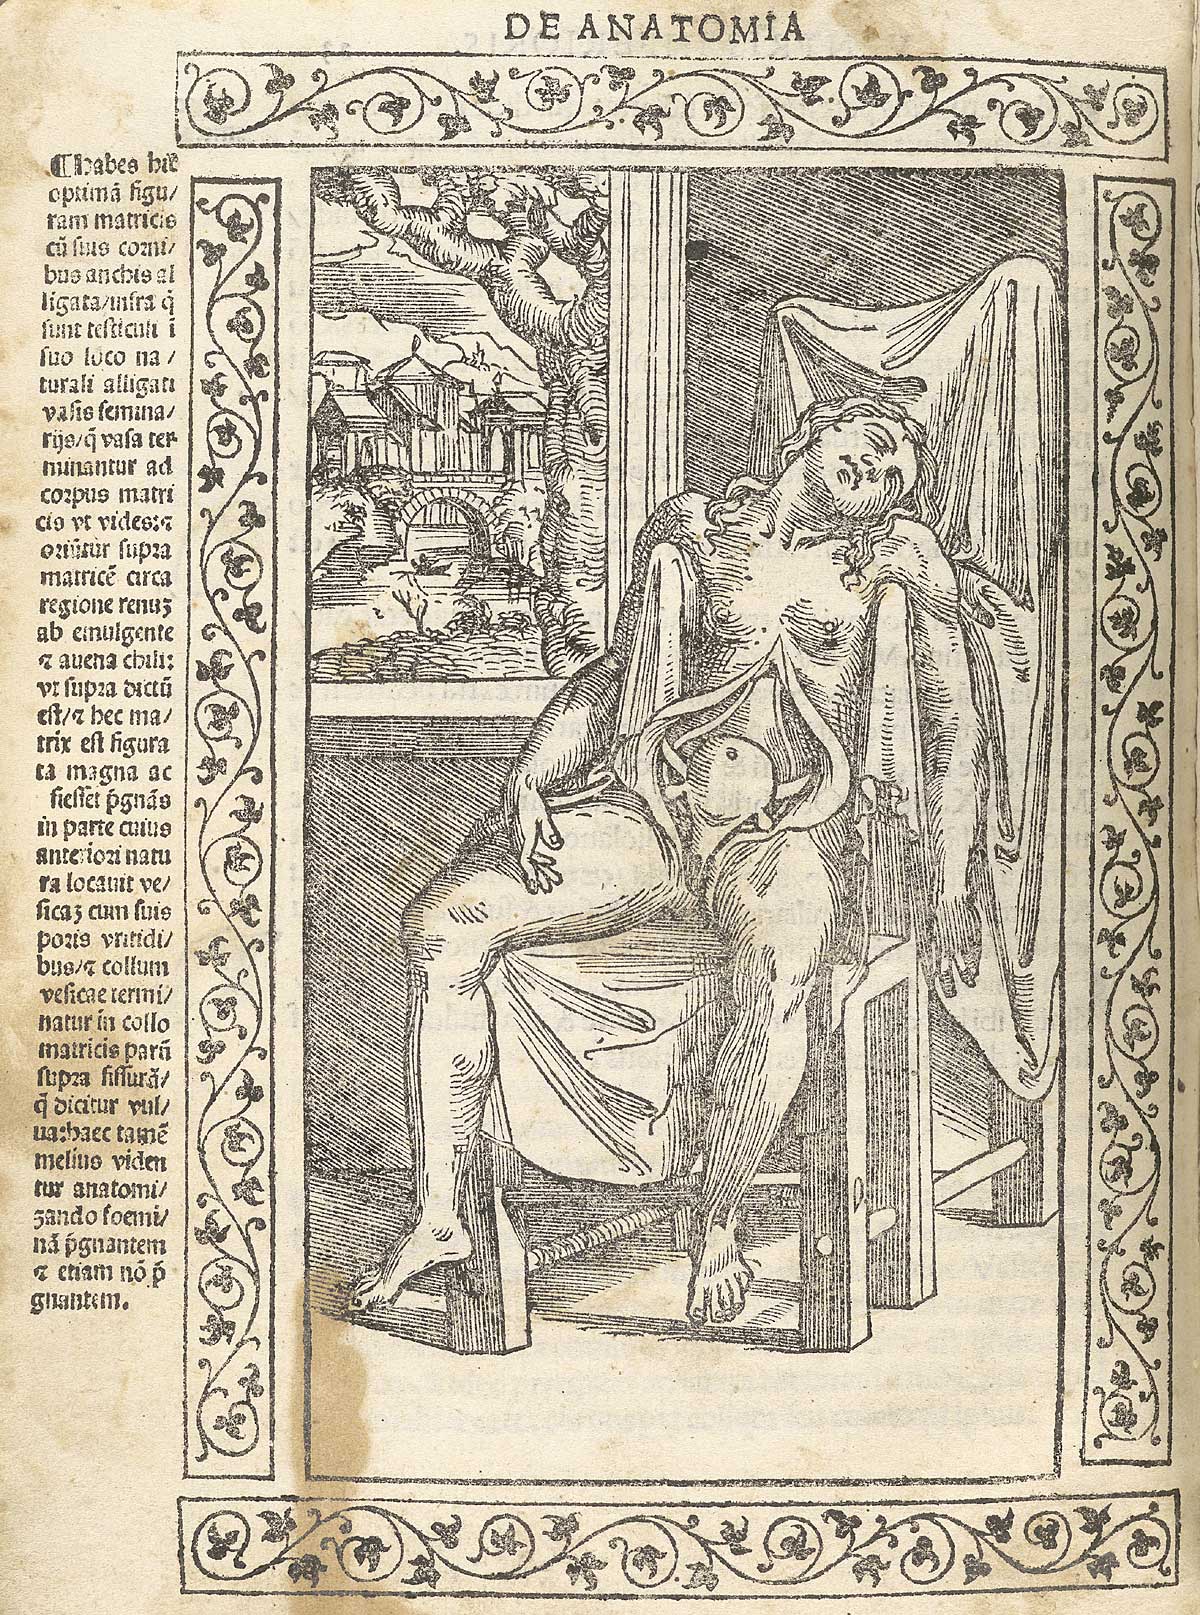 Woodcut of seated female figure with obdomen open and female reproductive organs on view; scene is indoors with window on left looking out on cityscape scene; with a woodcut border and text in Latin on the left side of page, from Berengario da Carpi’s Isagogae breues, Bologna, 1523, NLM Call no. WZ 240 B488i 1523.